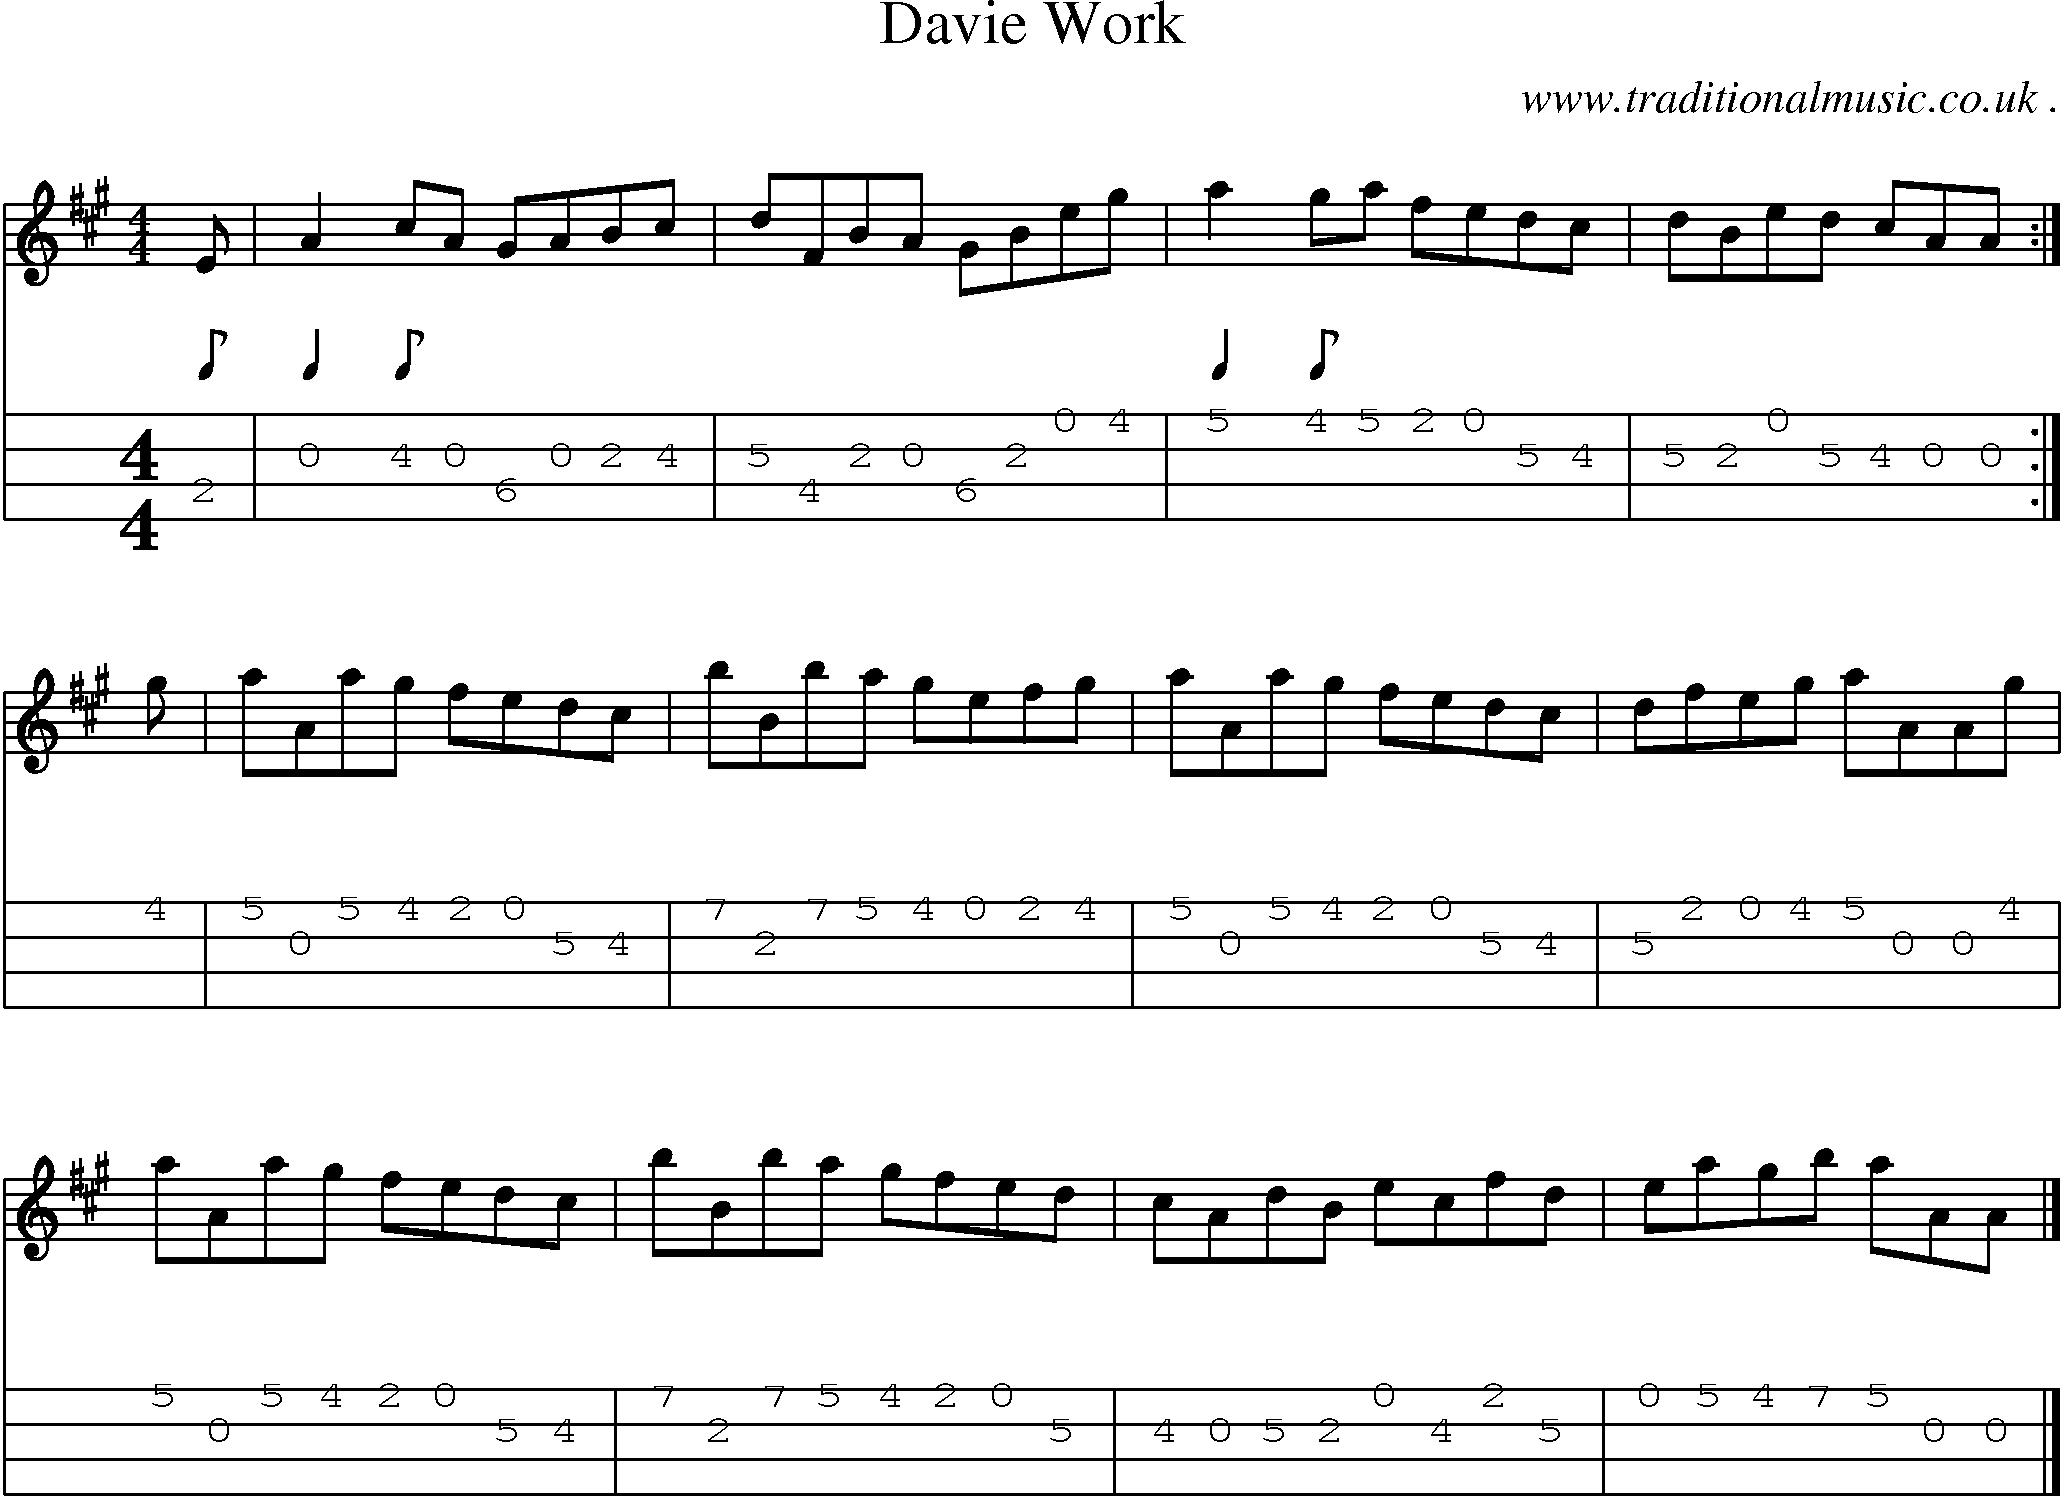 Sheet-music  score, Chords and Mandolin Tabs for Davie Work